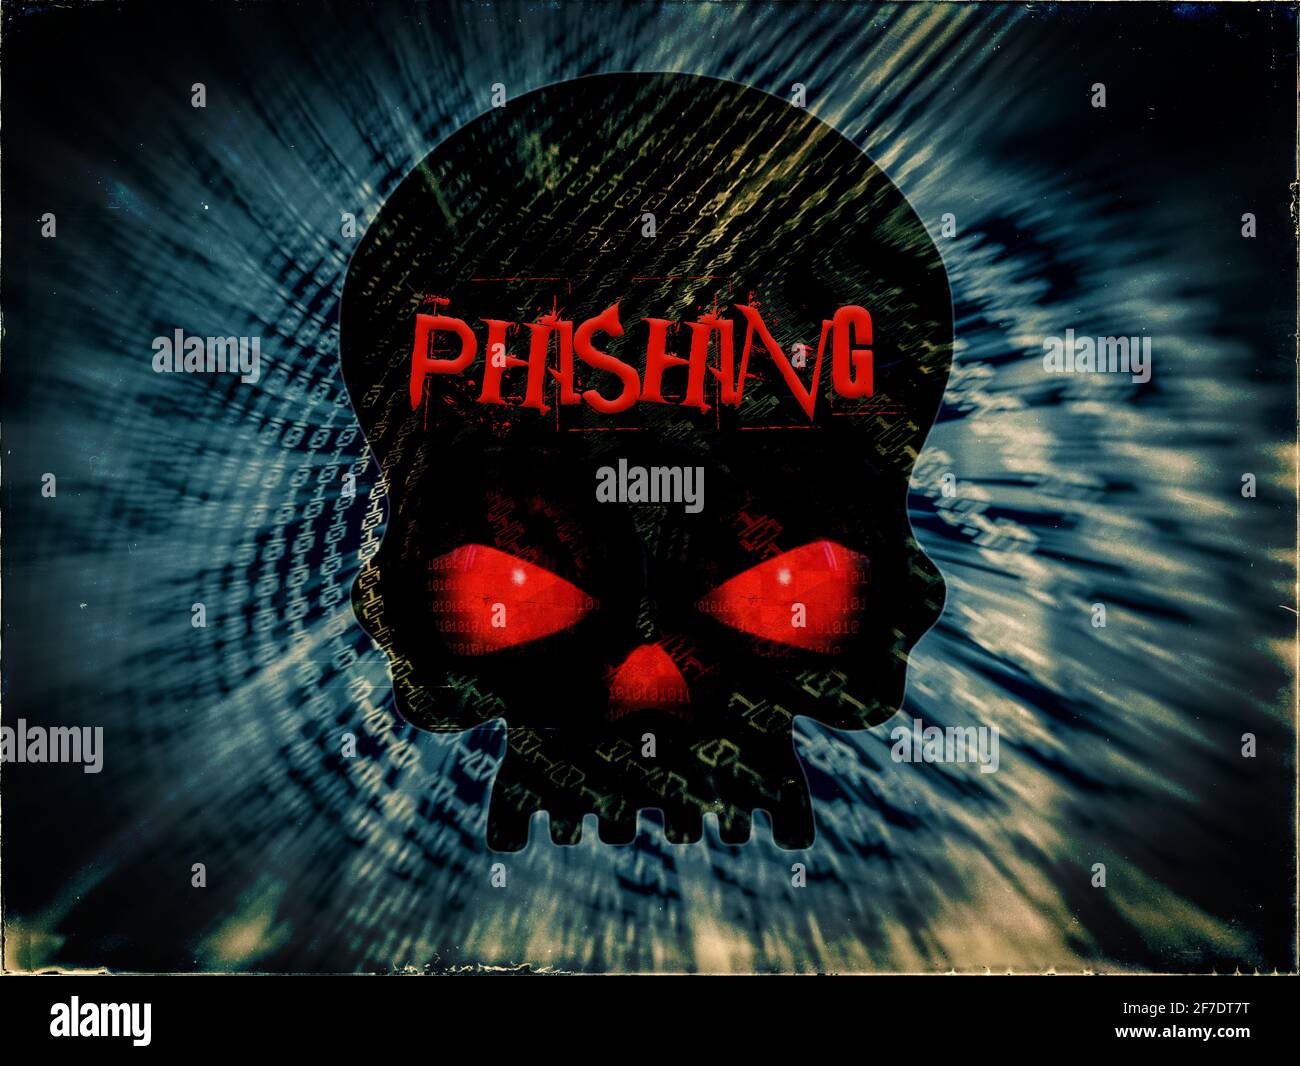 Phishing displayed on a Pirate skull on a Binary code background Stock Photo